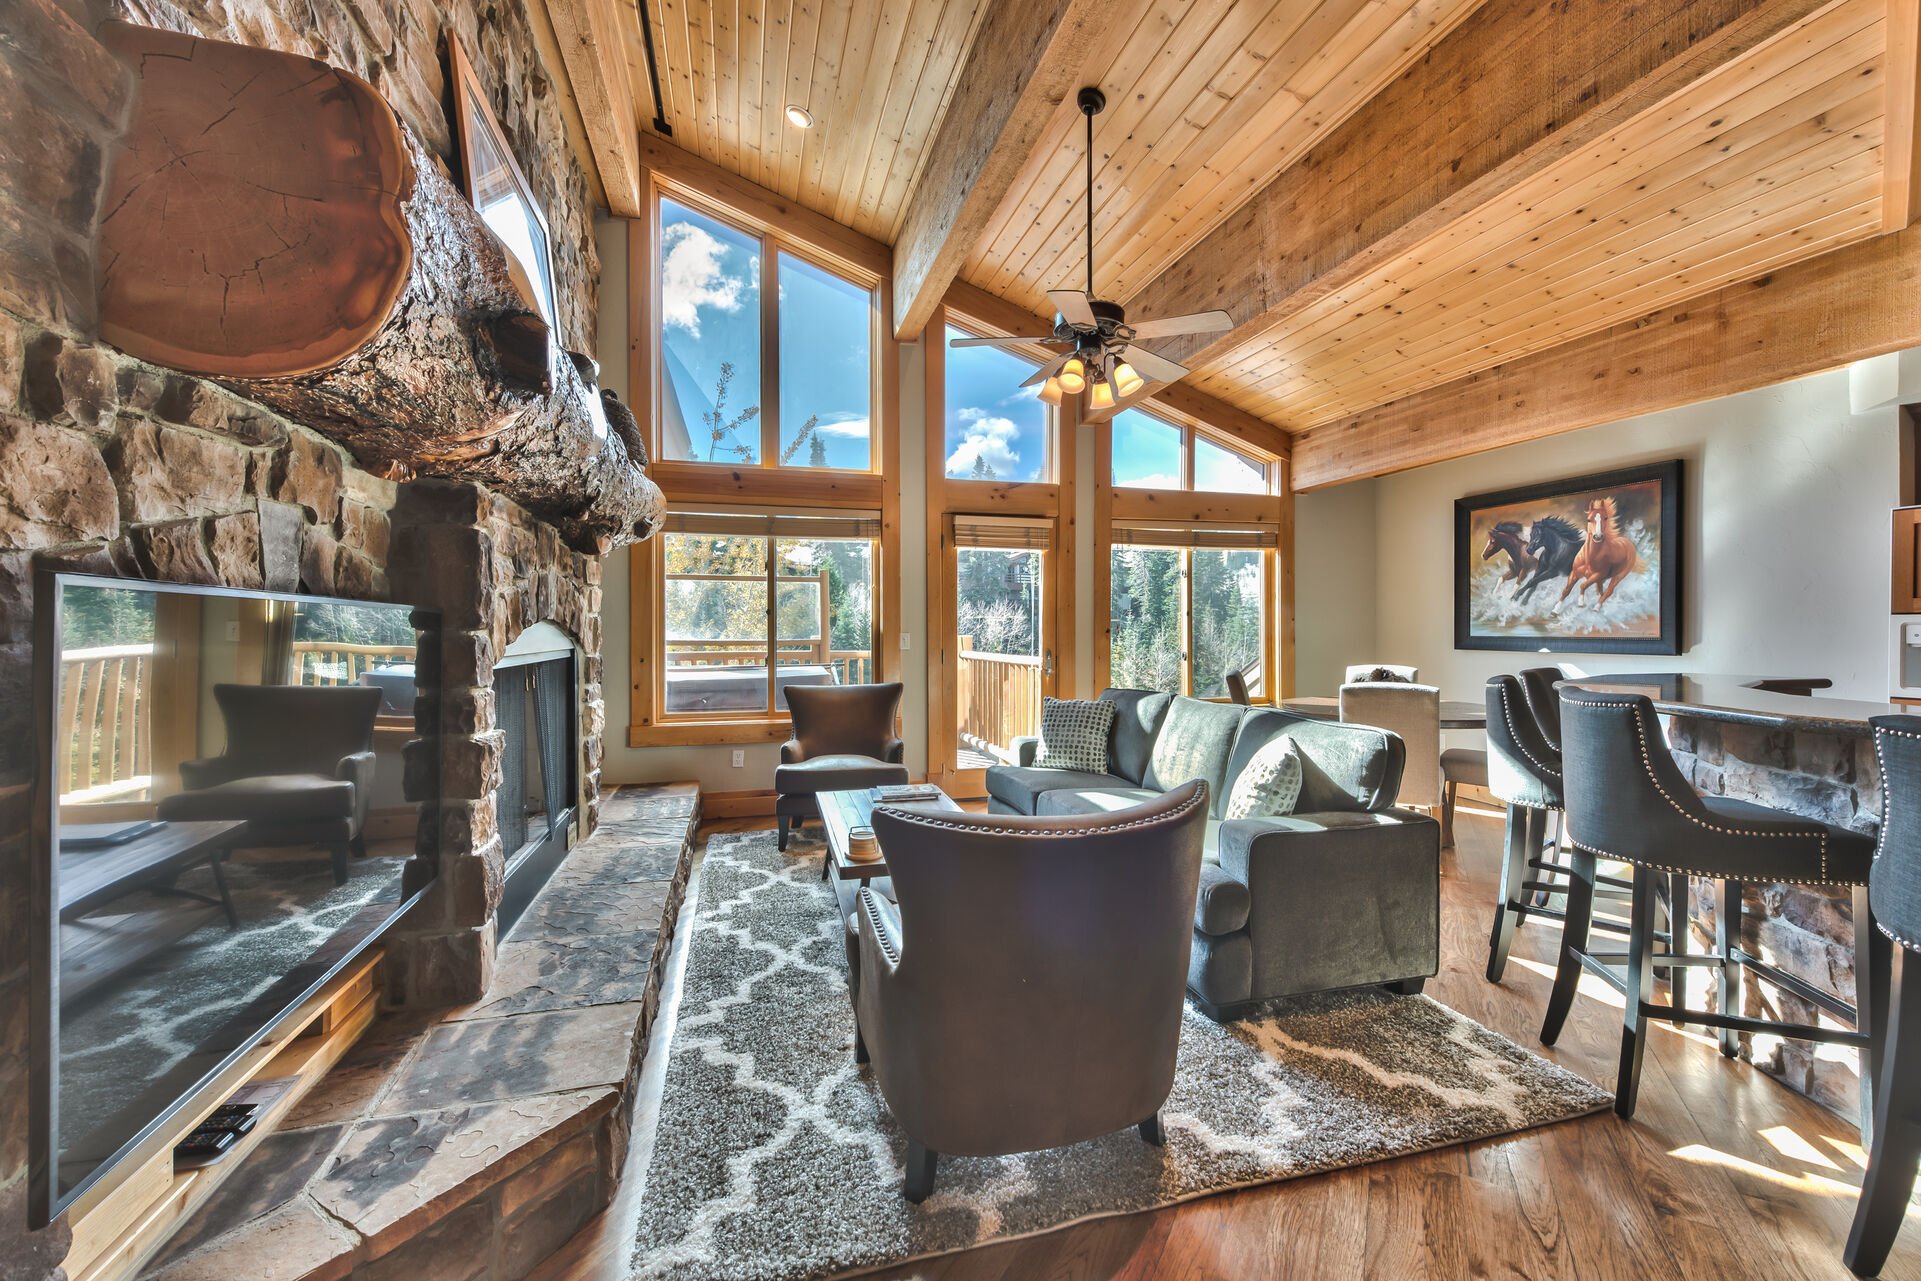 408 A- Comfortable Mountain Contemporary Living Room with Plenty of Natural Light